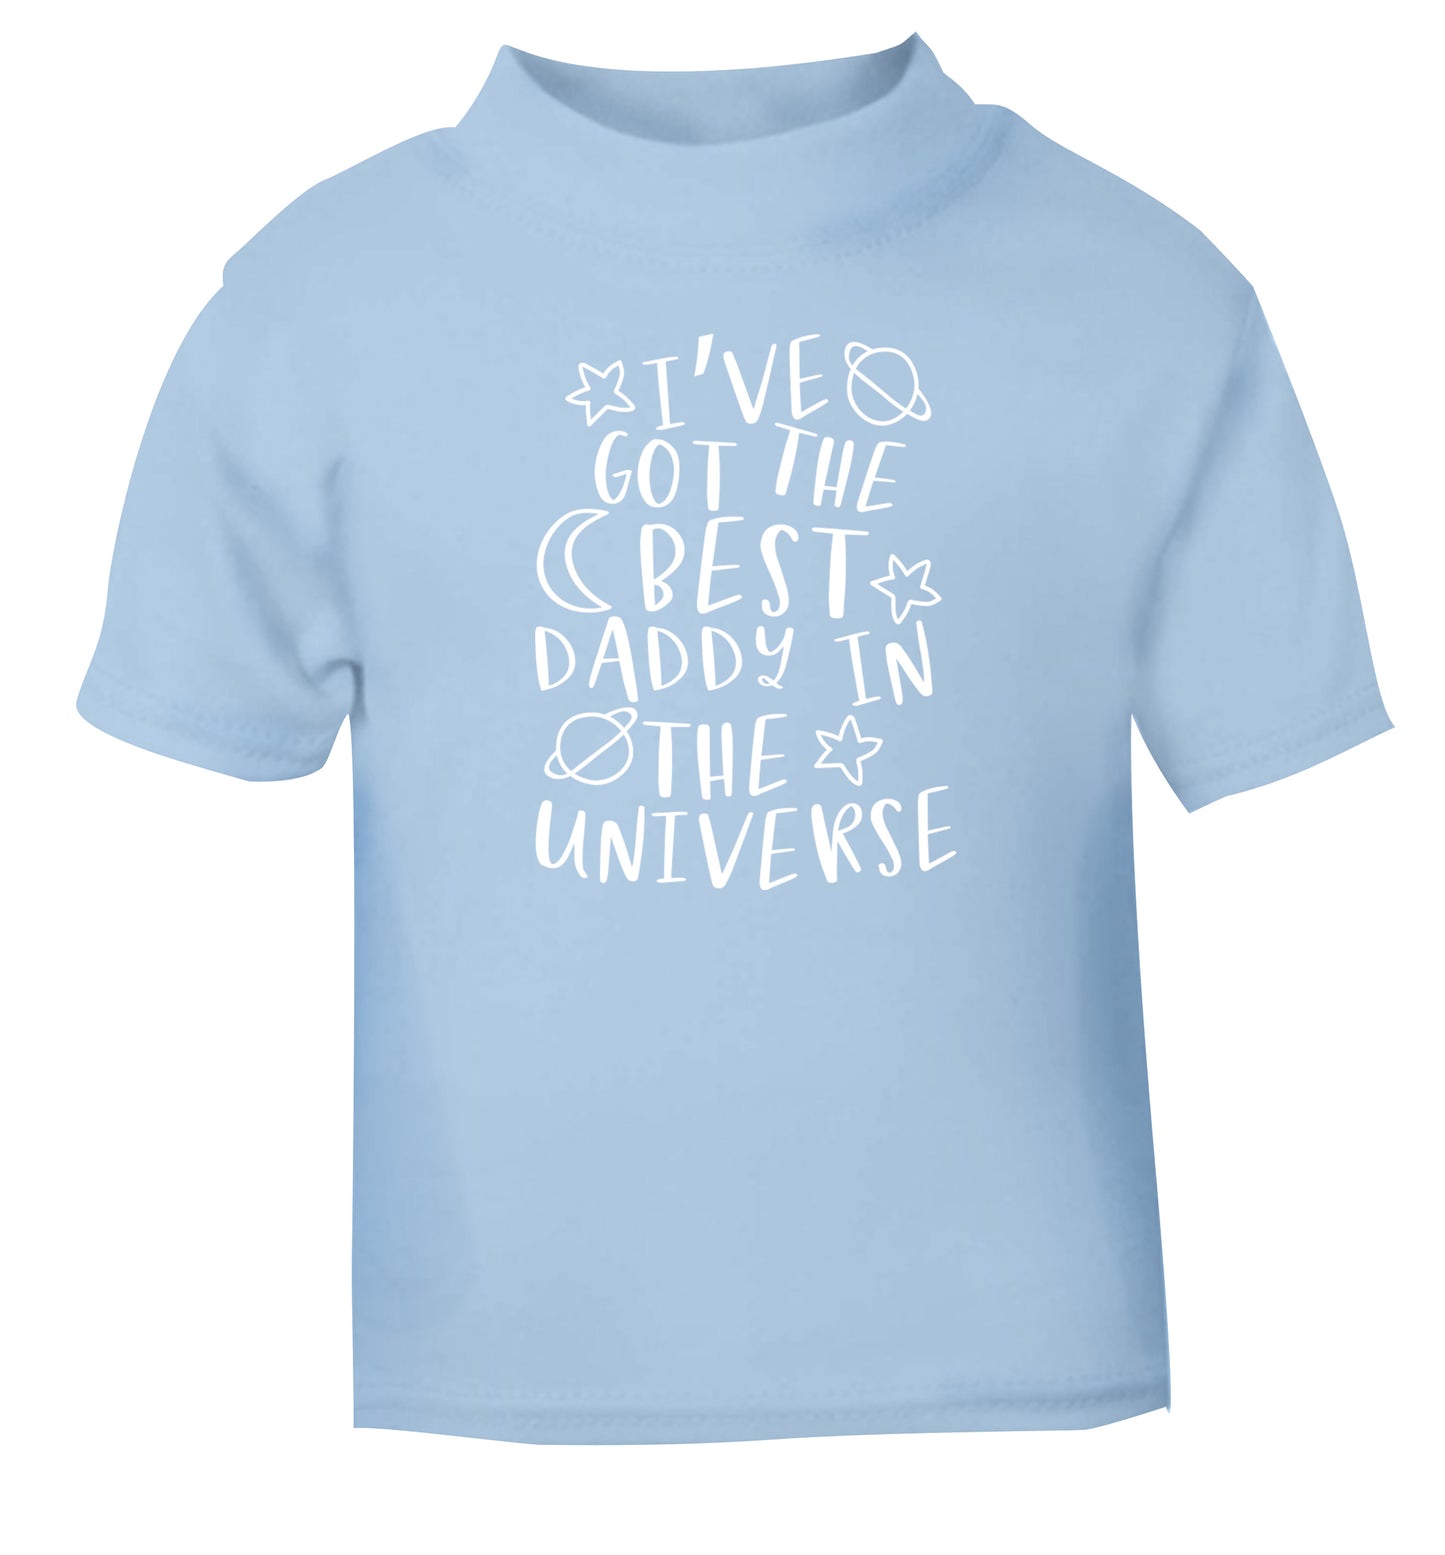 I've got the best daddy in the universe light blue Baby Toddler Tshirt 2 Years